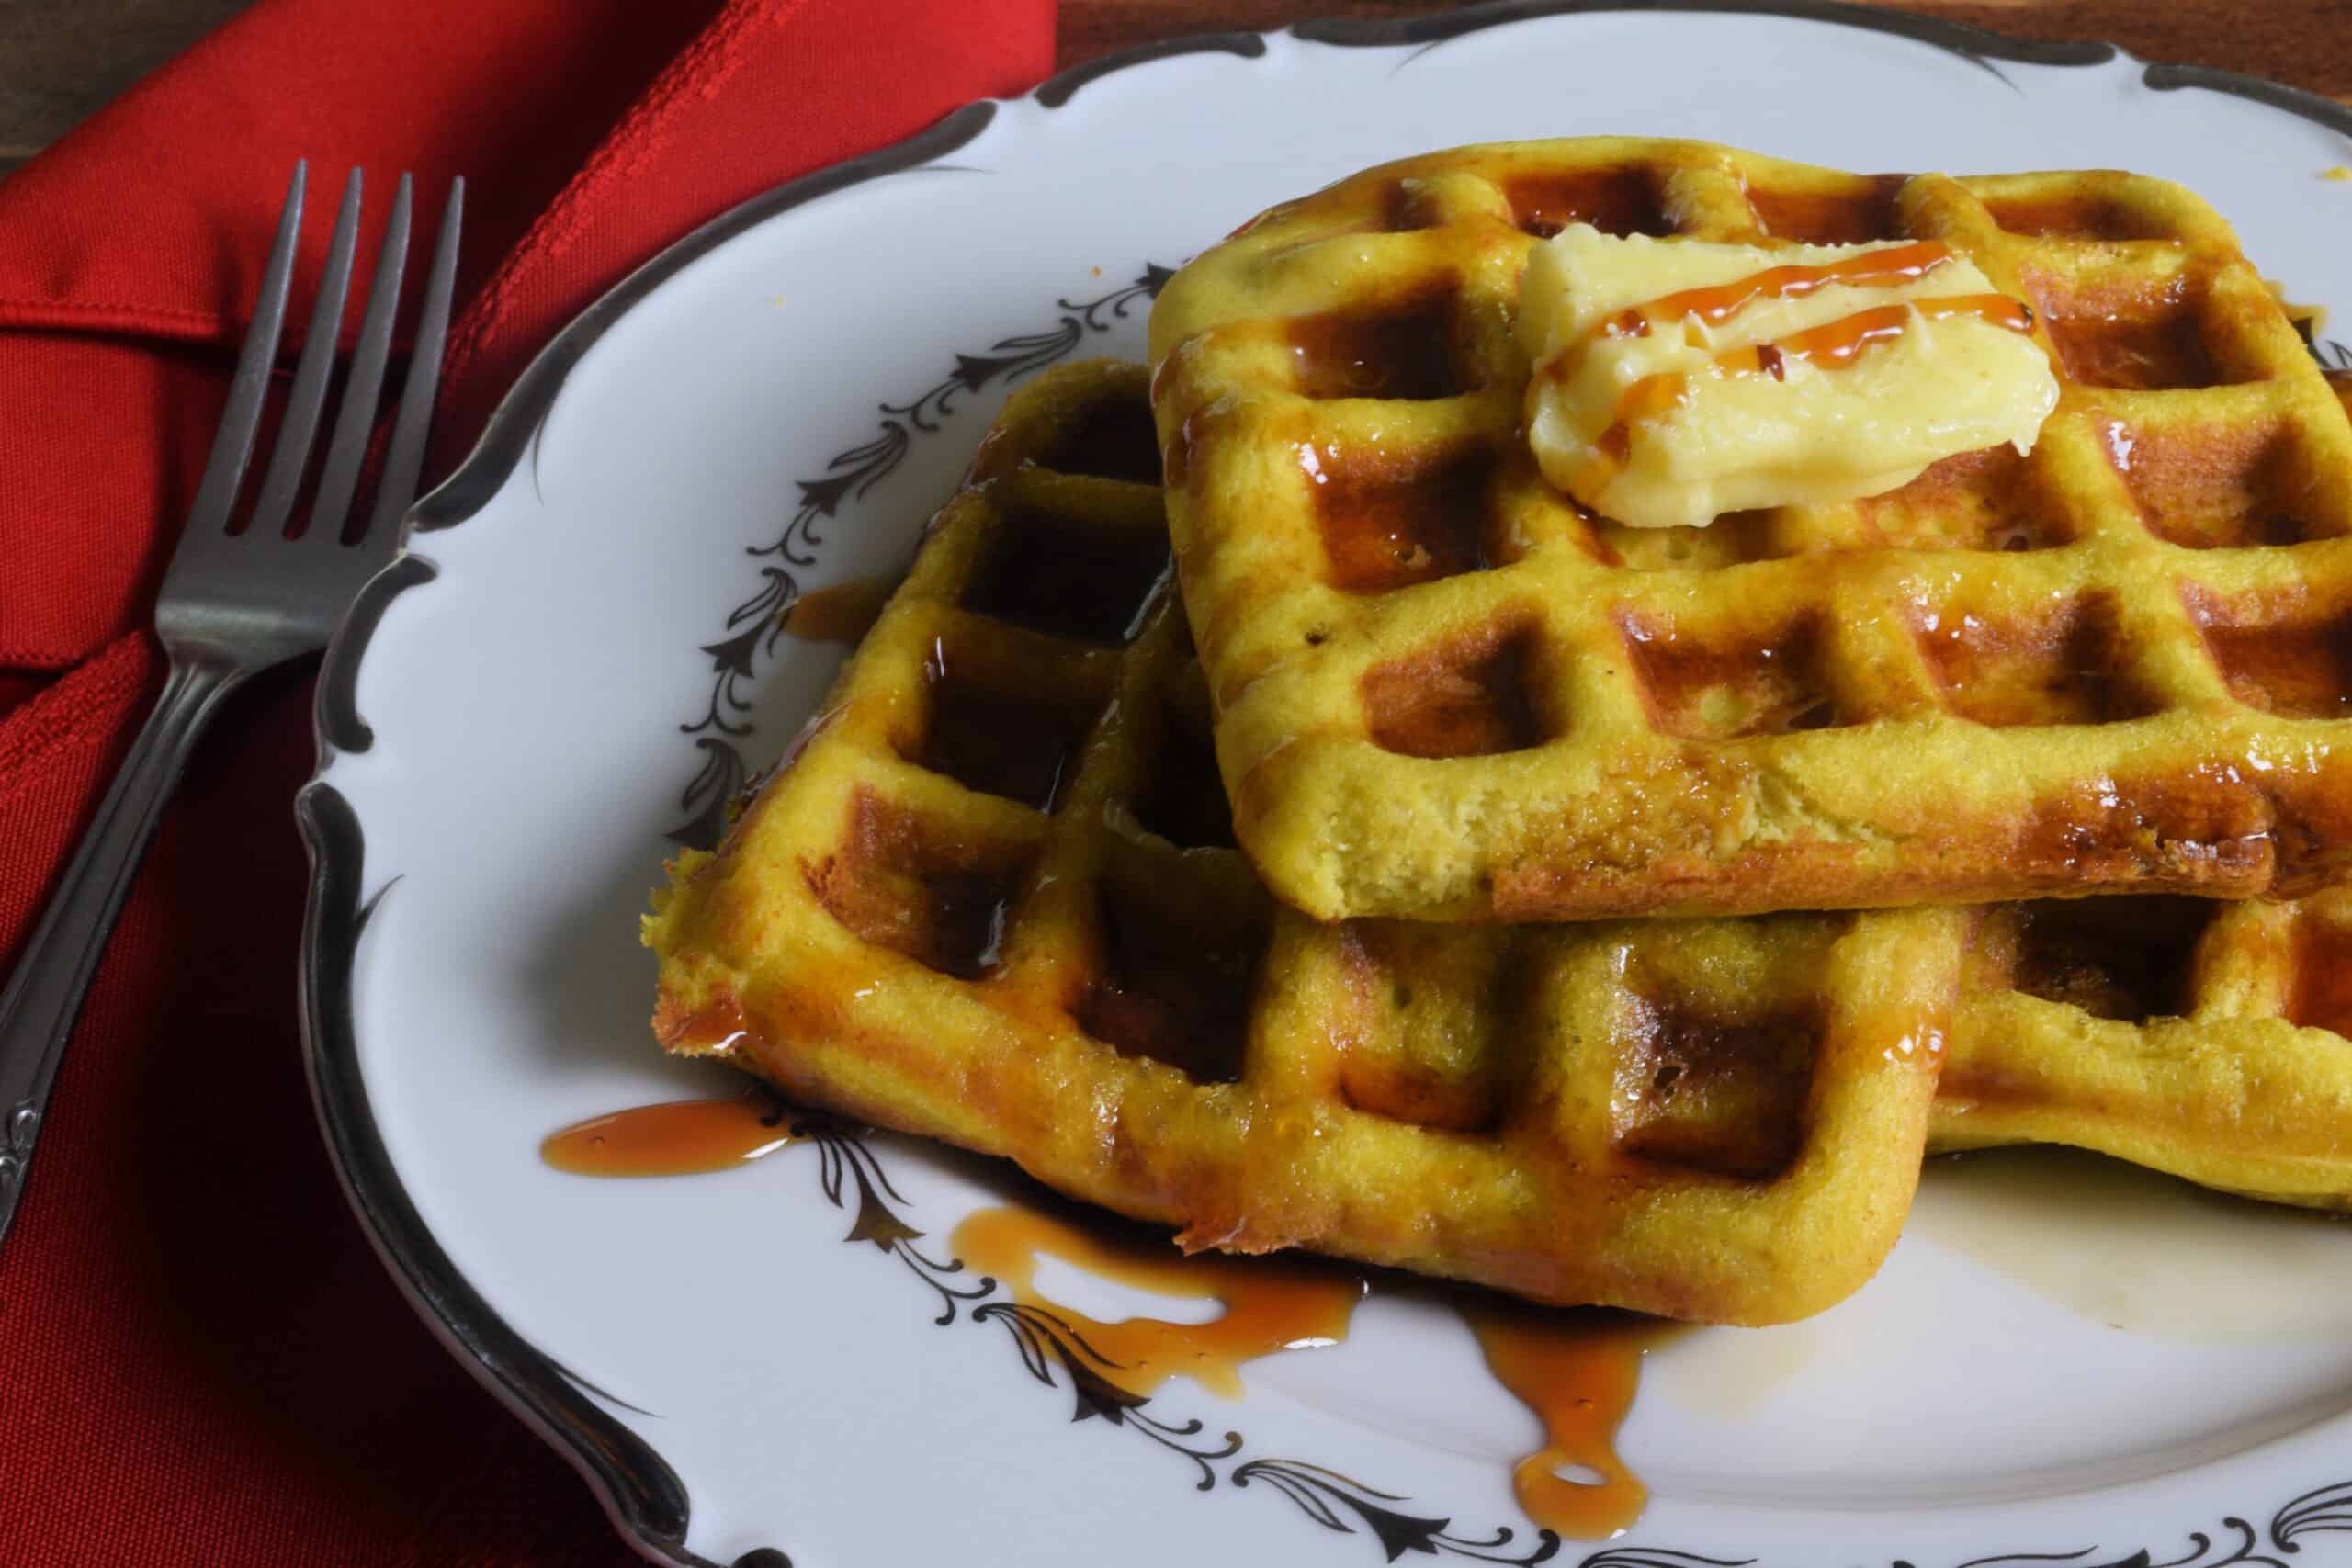 Gluten free waffles on a white plate covered in butter and maple syrup next to a red napkin.